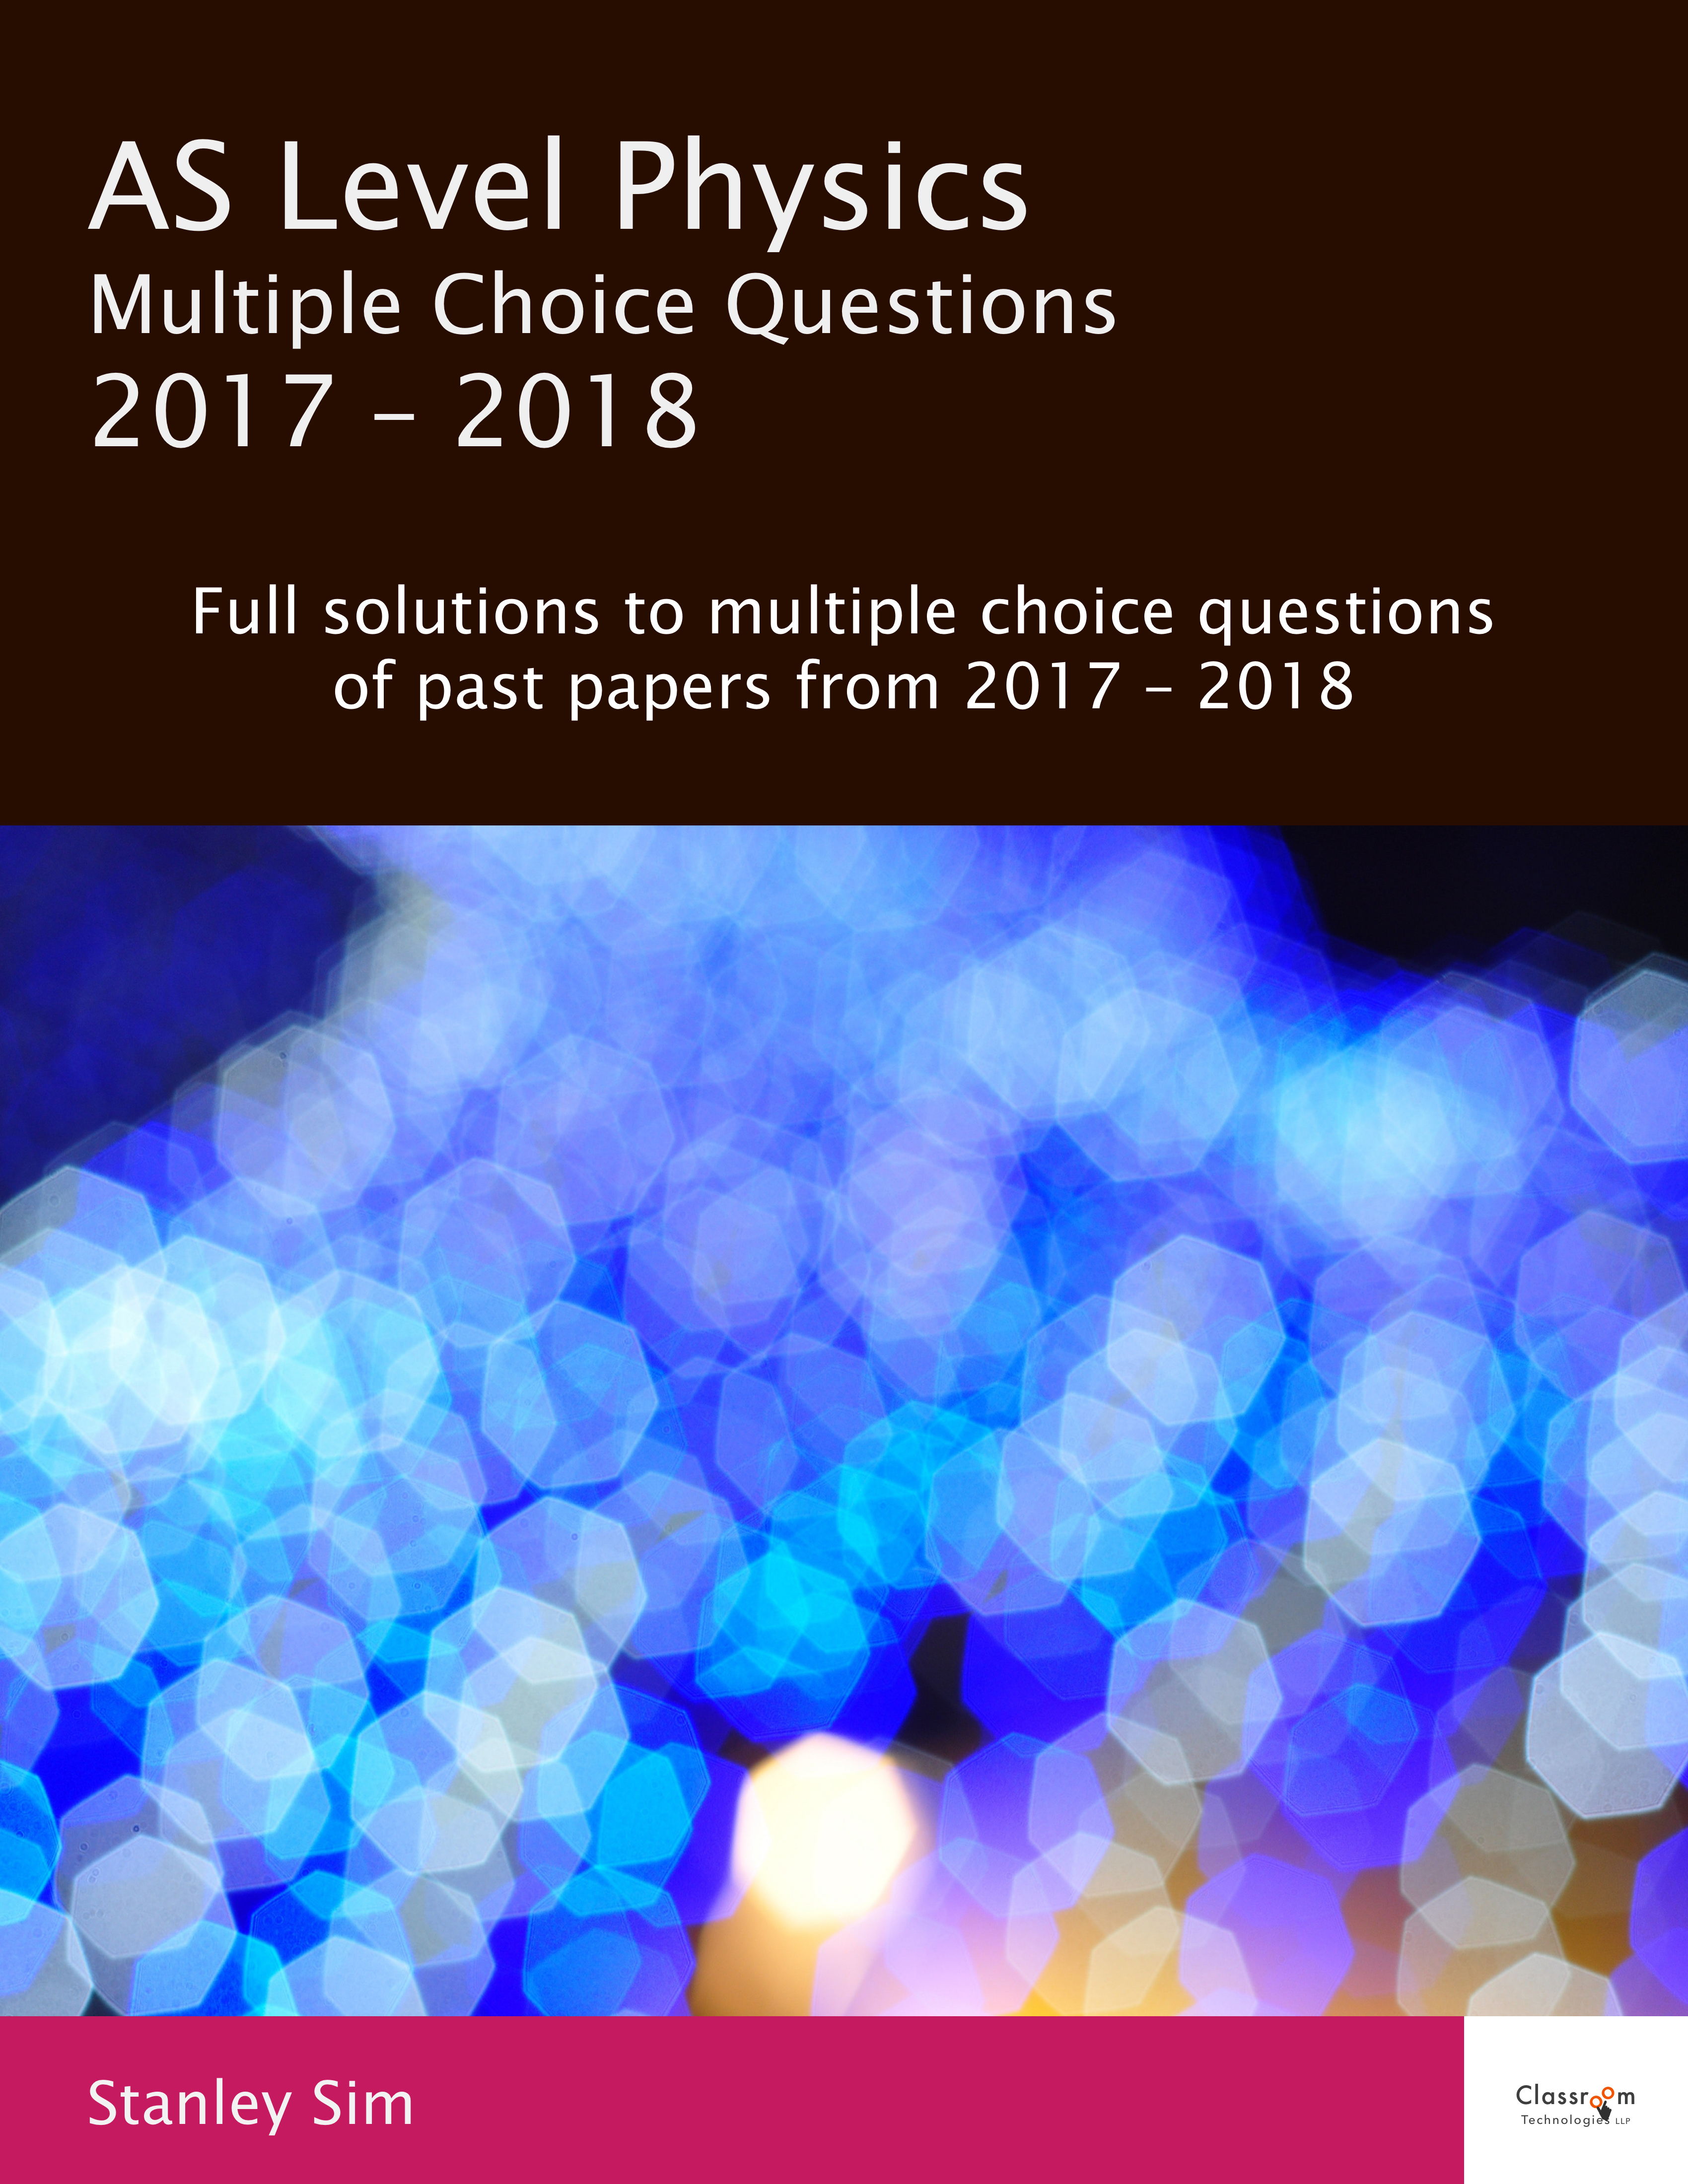 Cambridge AS Level Physics multiple choice questions full solutions